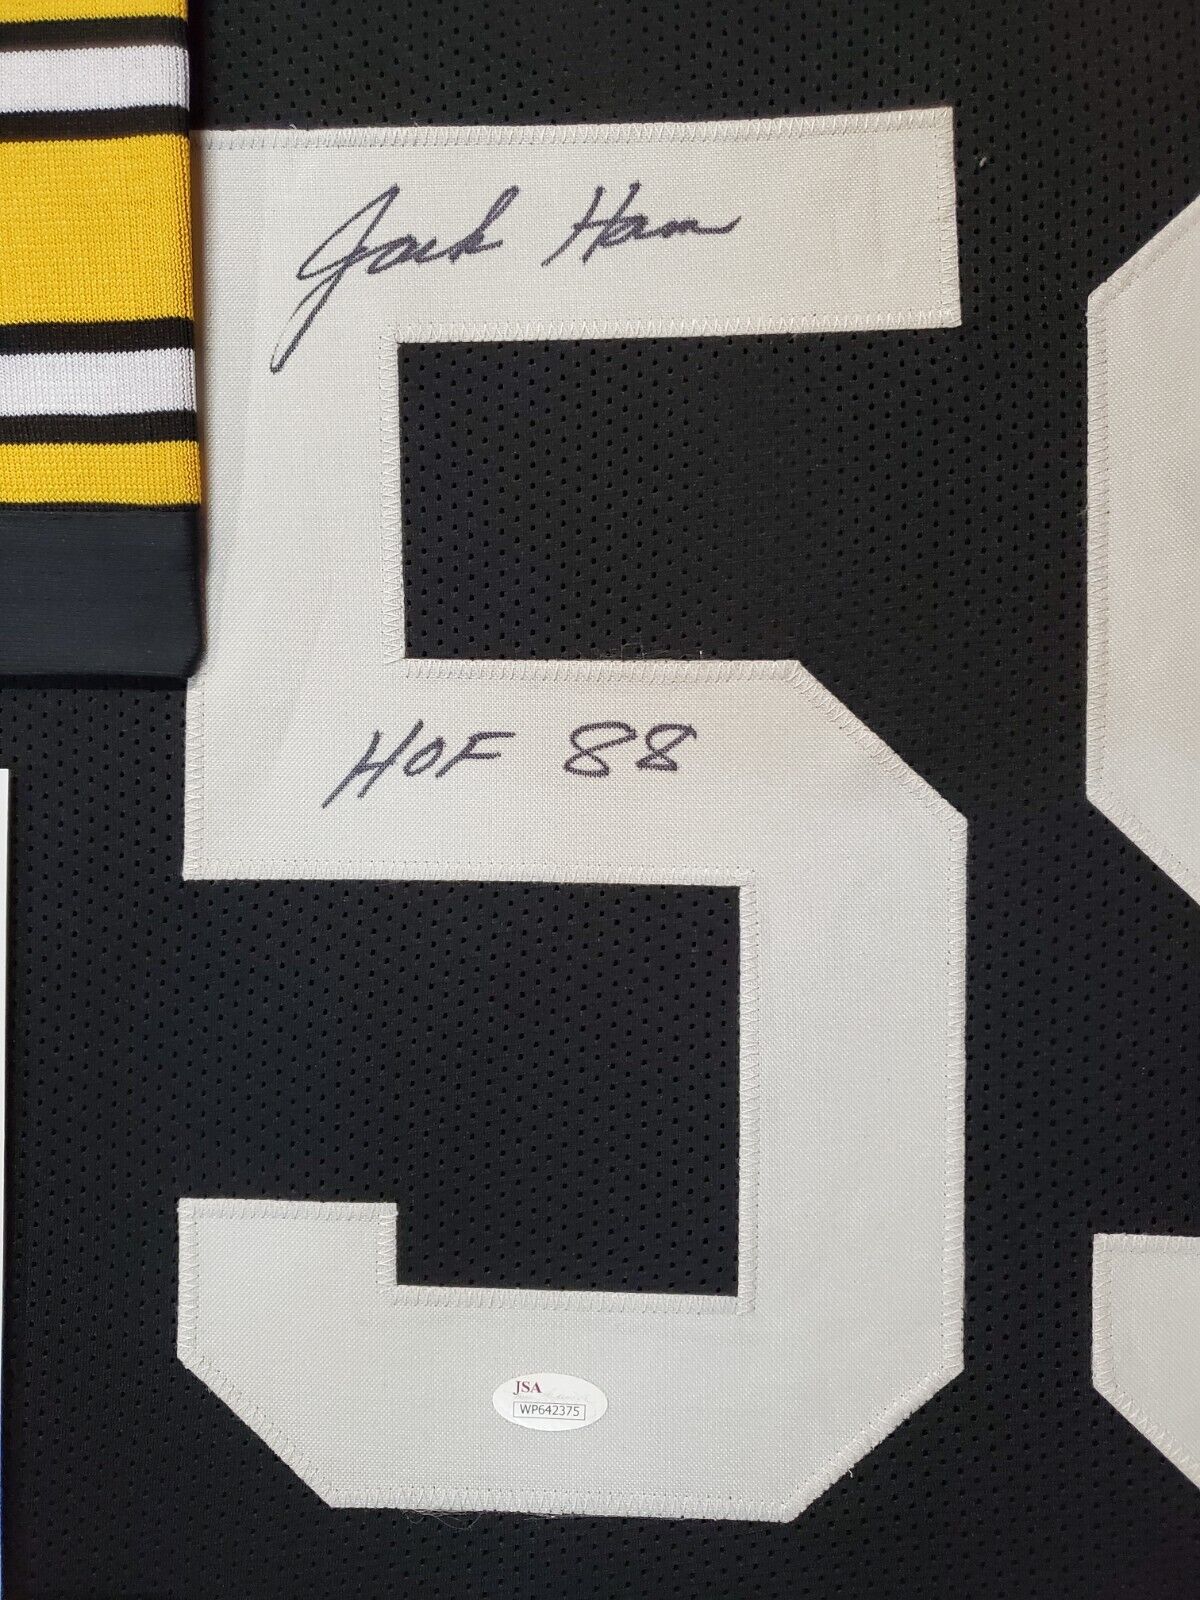 MVP Authentics Framed Pittsburgh Steelers Jack Ham Autographed Signed Inscribed Stat Jersey Jsa 450 sports jersey framing , jersey framing